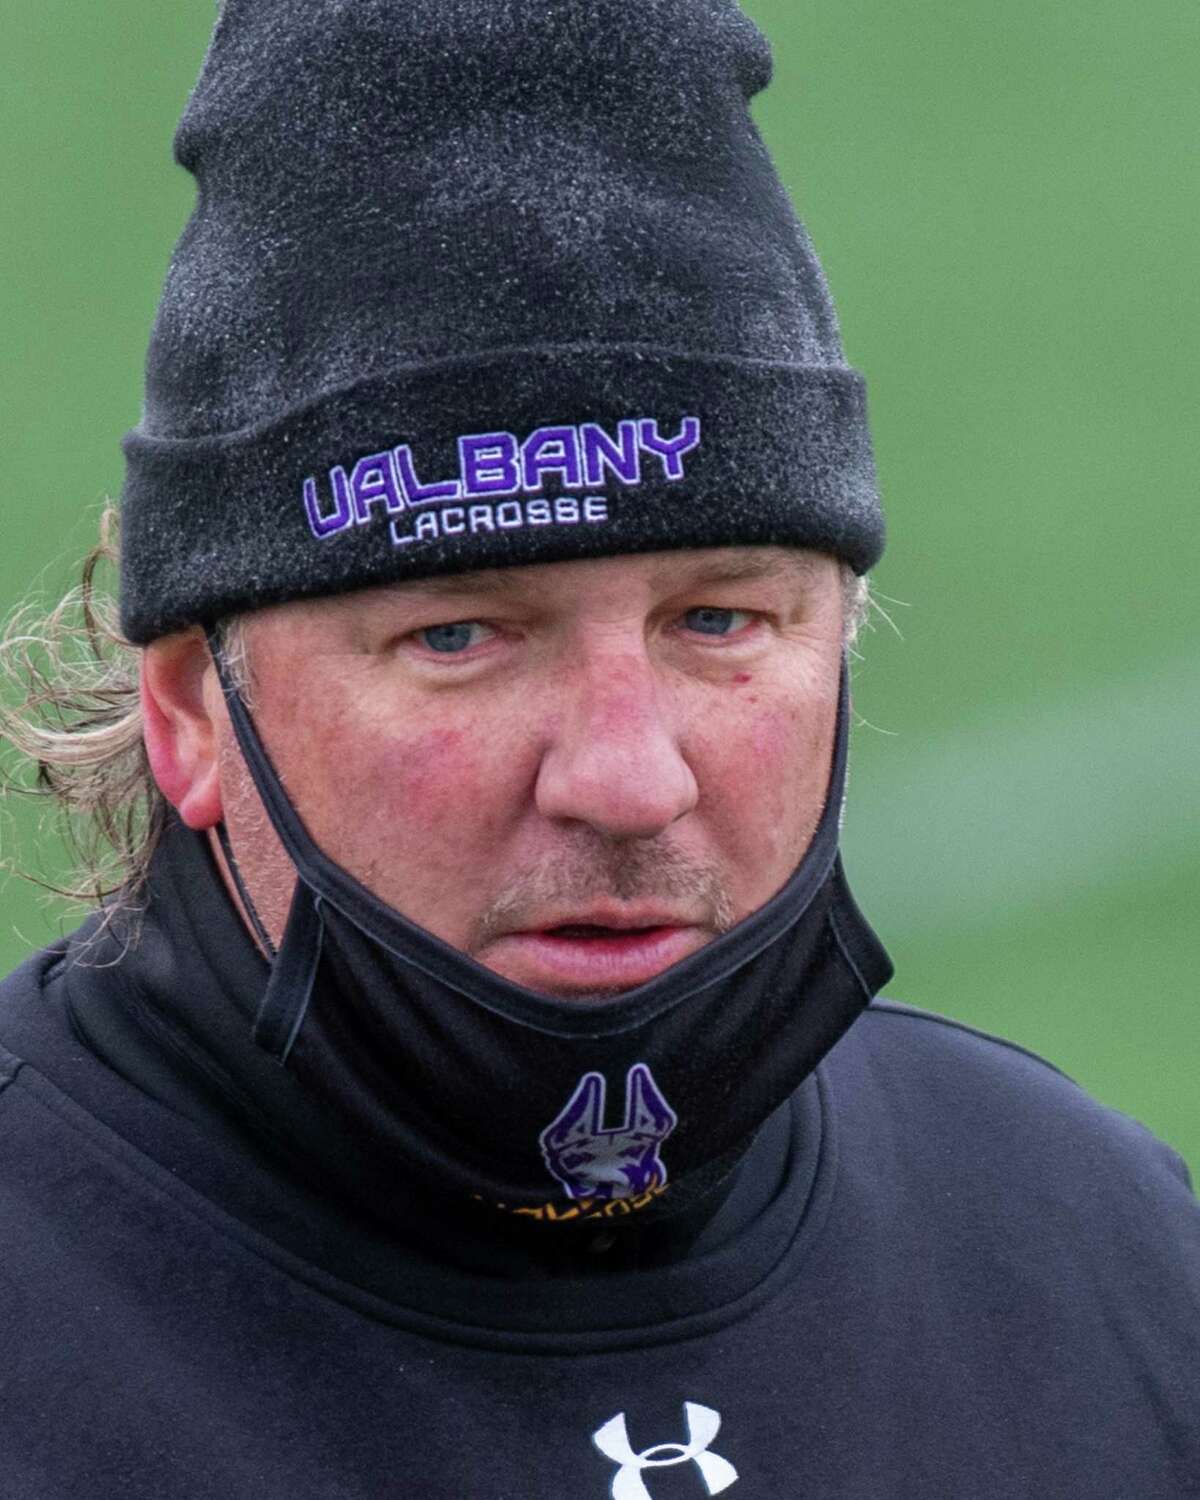 UAlbany head lacrosse coach Scott Marr said having to leave 18 players home means less of a rooting section on the bench for the Danes. (Jim Franco/Special to the Times Union)